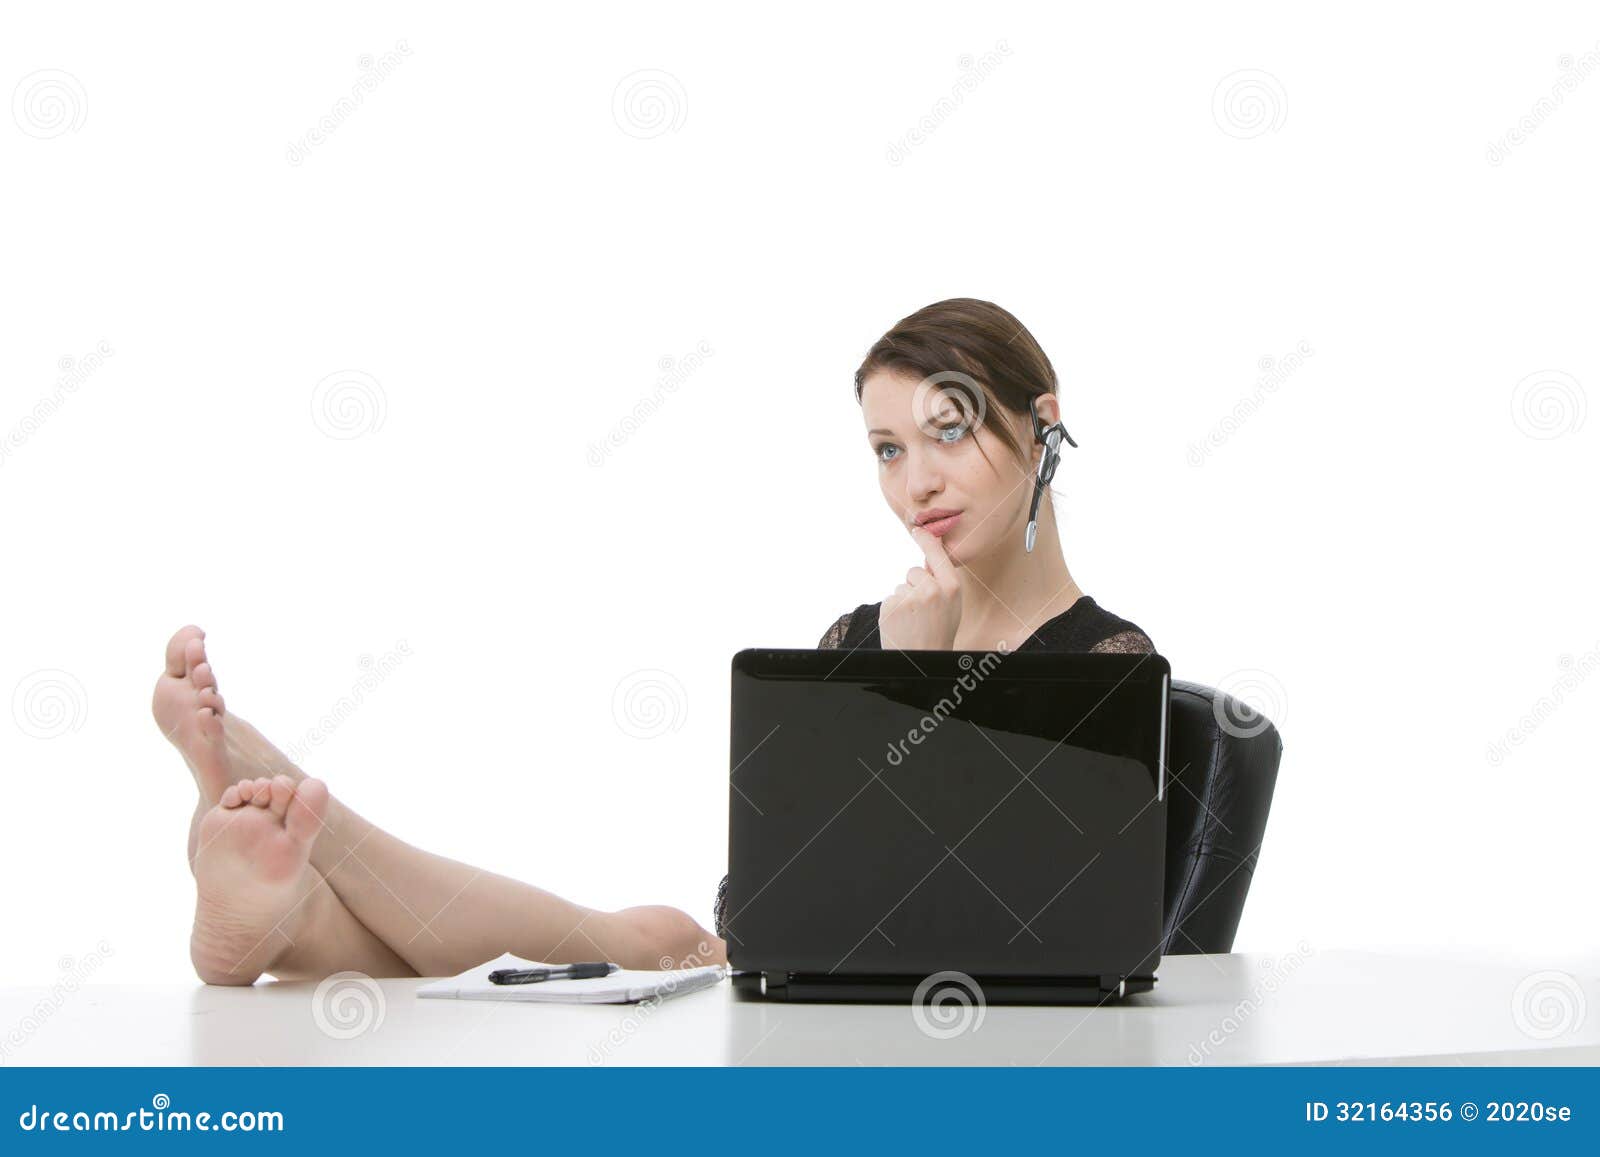 Barefoot Pregnant Business Woman In Office Stock Photo 